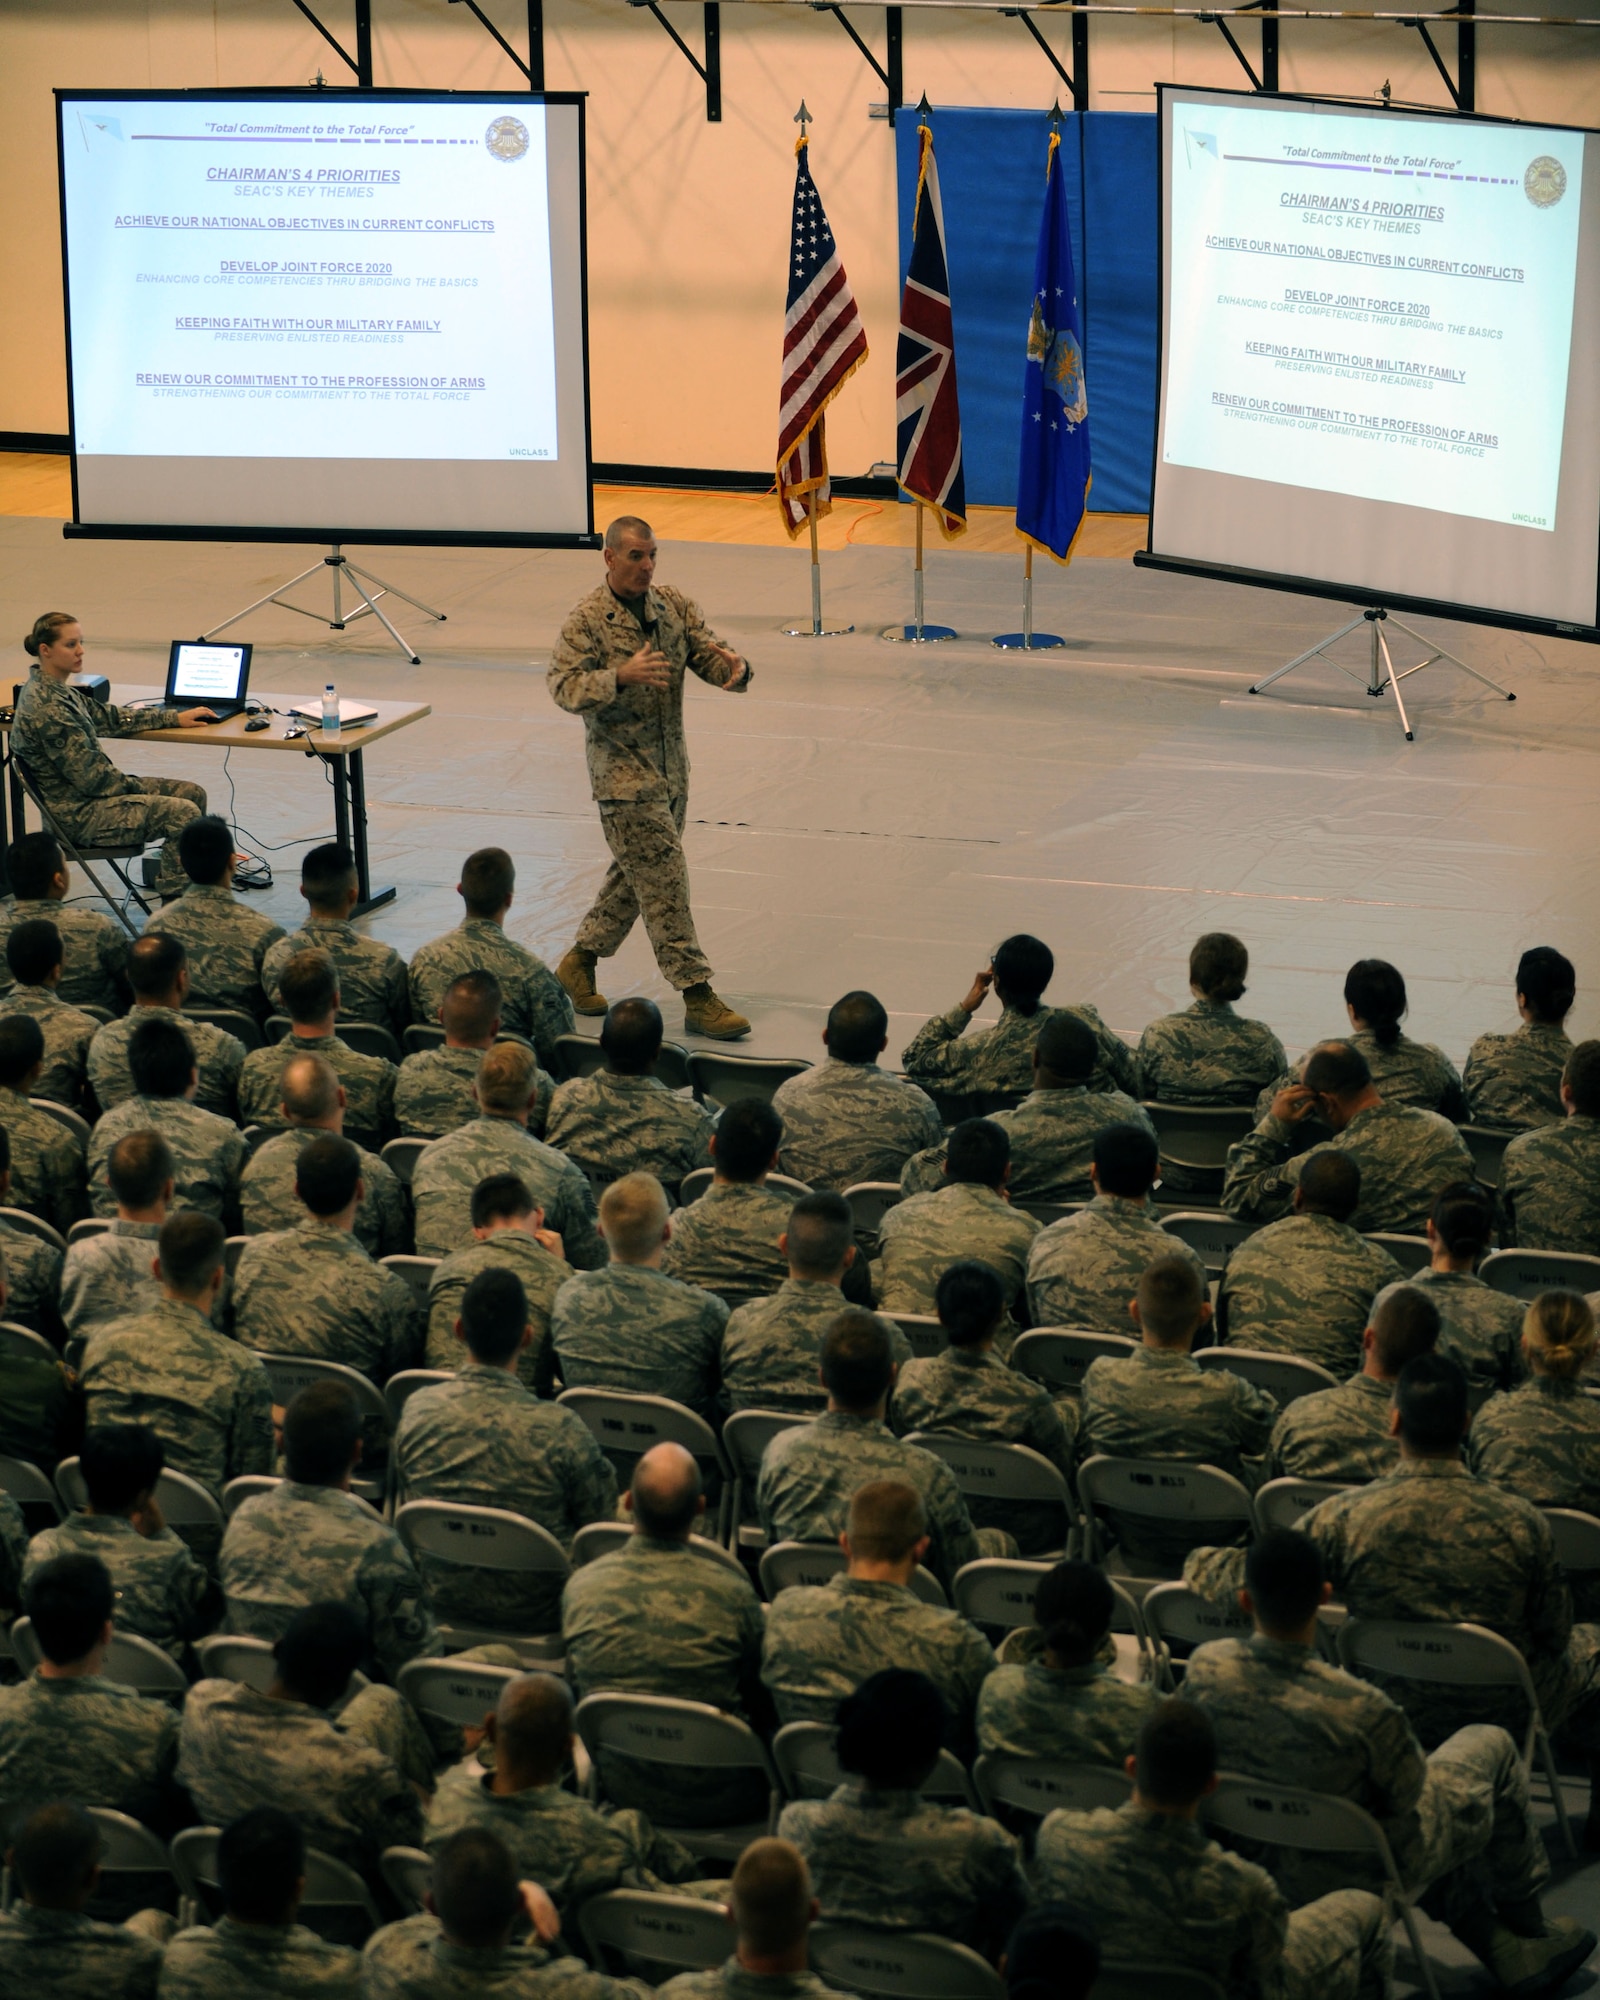 U.S. Marine Corps Sgt. Maj. Bryan Battaglia, senior enlisted advisor to the Chairman of the Joint Chiefs of Staff, addresses Airmen during a town hall meeting June 20, 2013, in the Hardstand Fitness Center on RAF Mildenhall, England. During the town hall meeting, Battaglia explained the four priorities of the Chairman of the JCS. (U.S. Air Force photo by Airman 1st Class Preston Webb/Released)